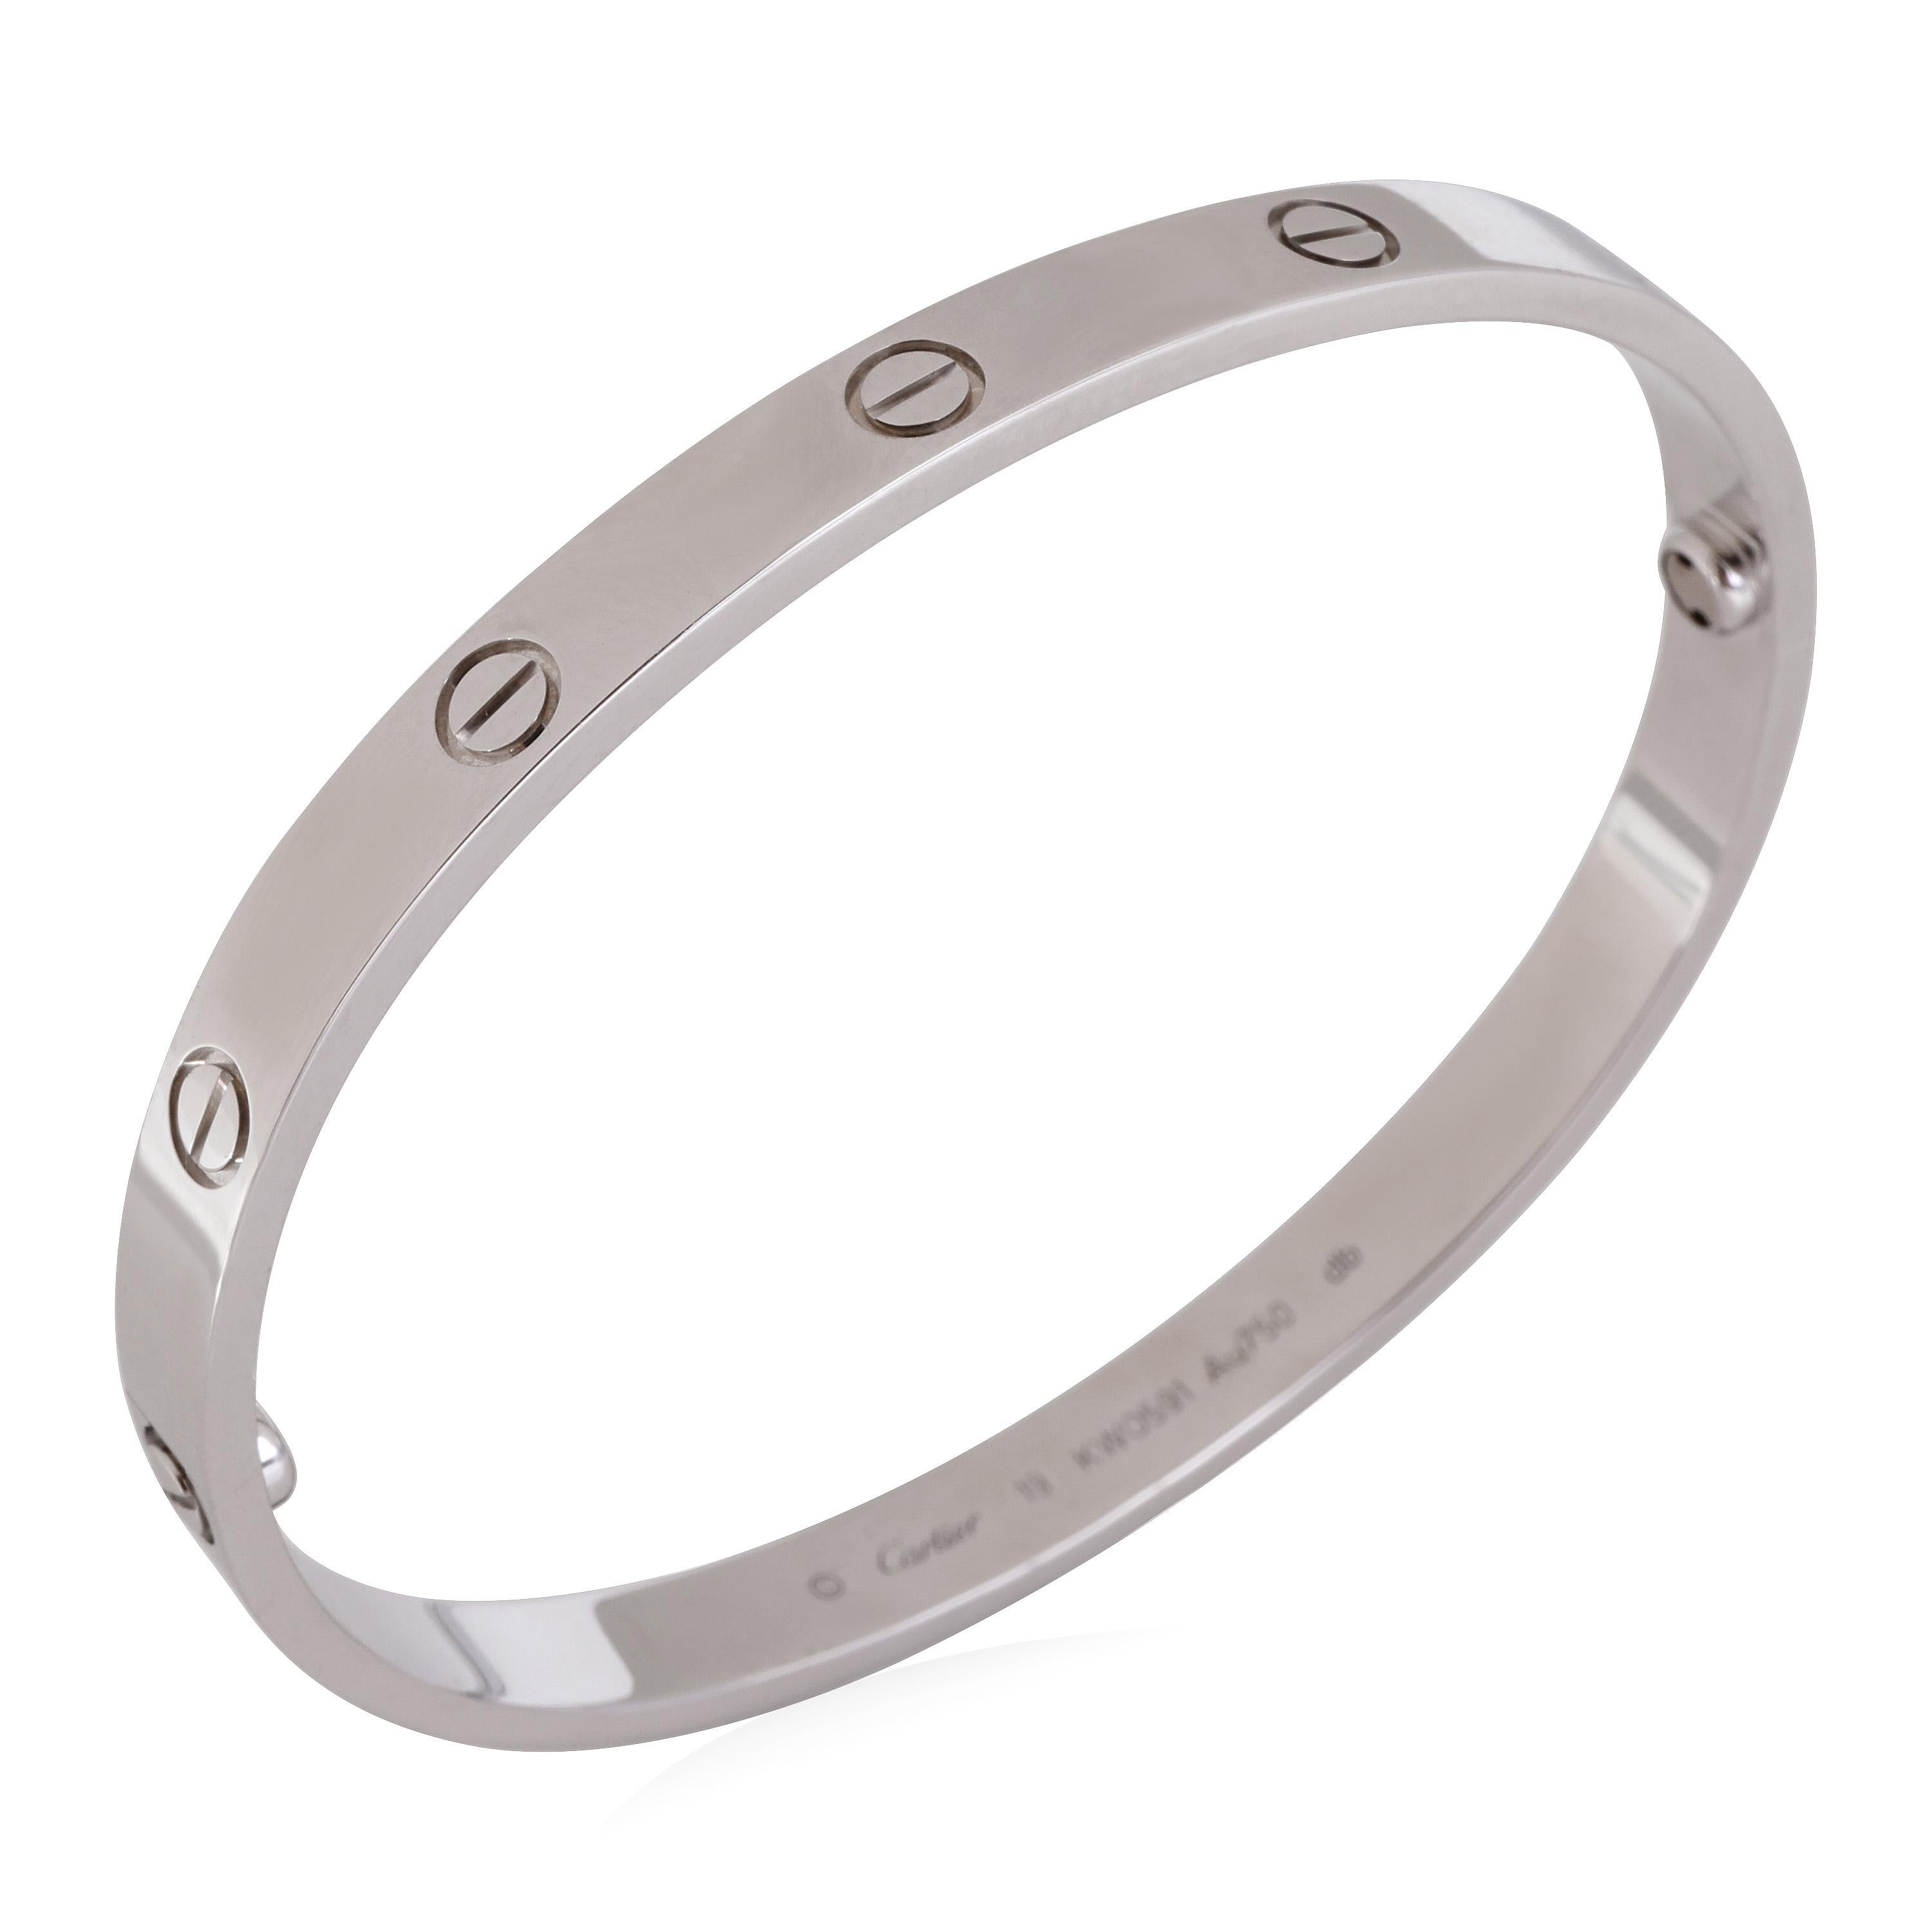 Cartier Love Bracelet in 18k White Gold (Size 19)

PRIMARY DETAILS
SKU: 119819
Listing Title: Cartier Love Bracelet in 18k White Gold (Size 19)
Condition Description: Retails for 7400 USD. In excellent condition and recently polished. Size 19. Comes